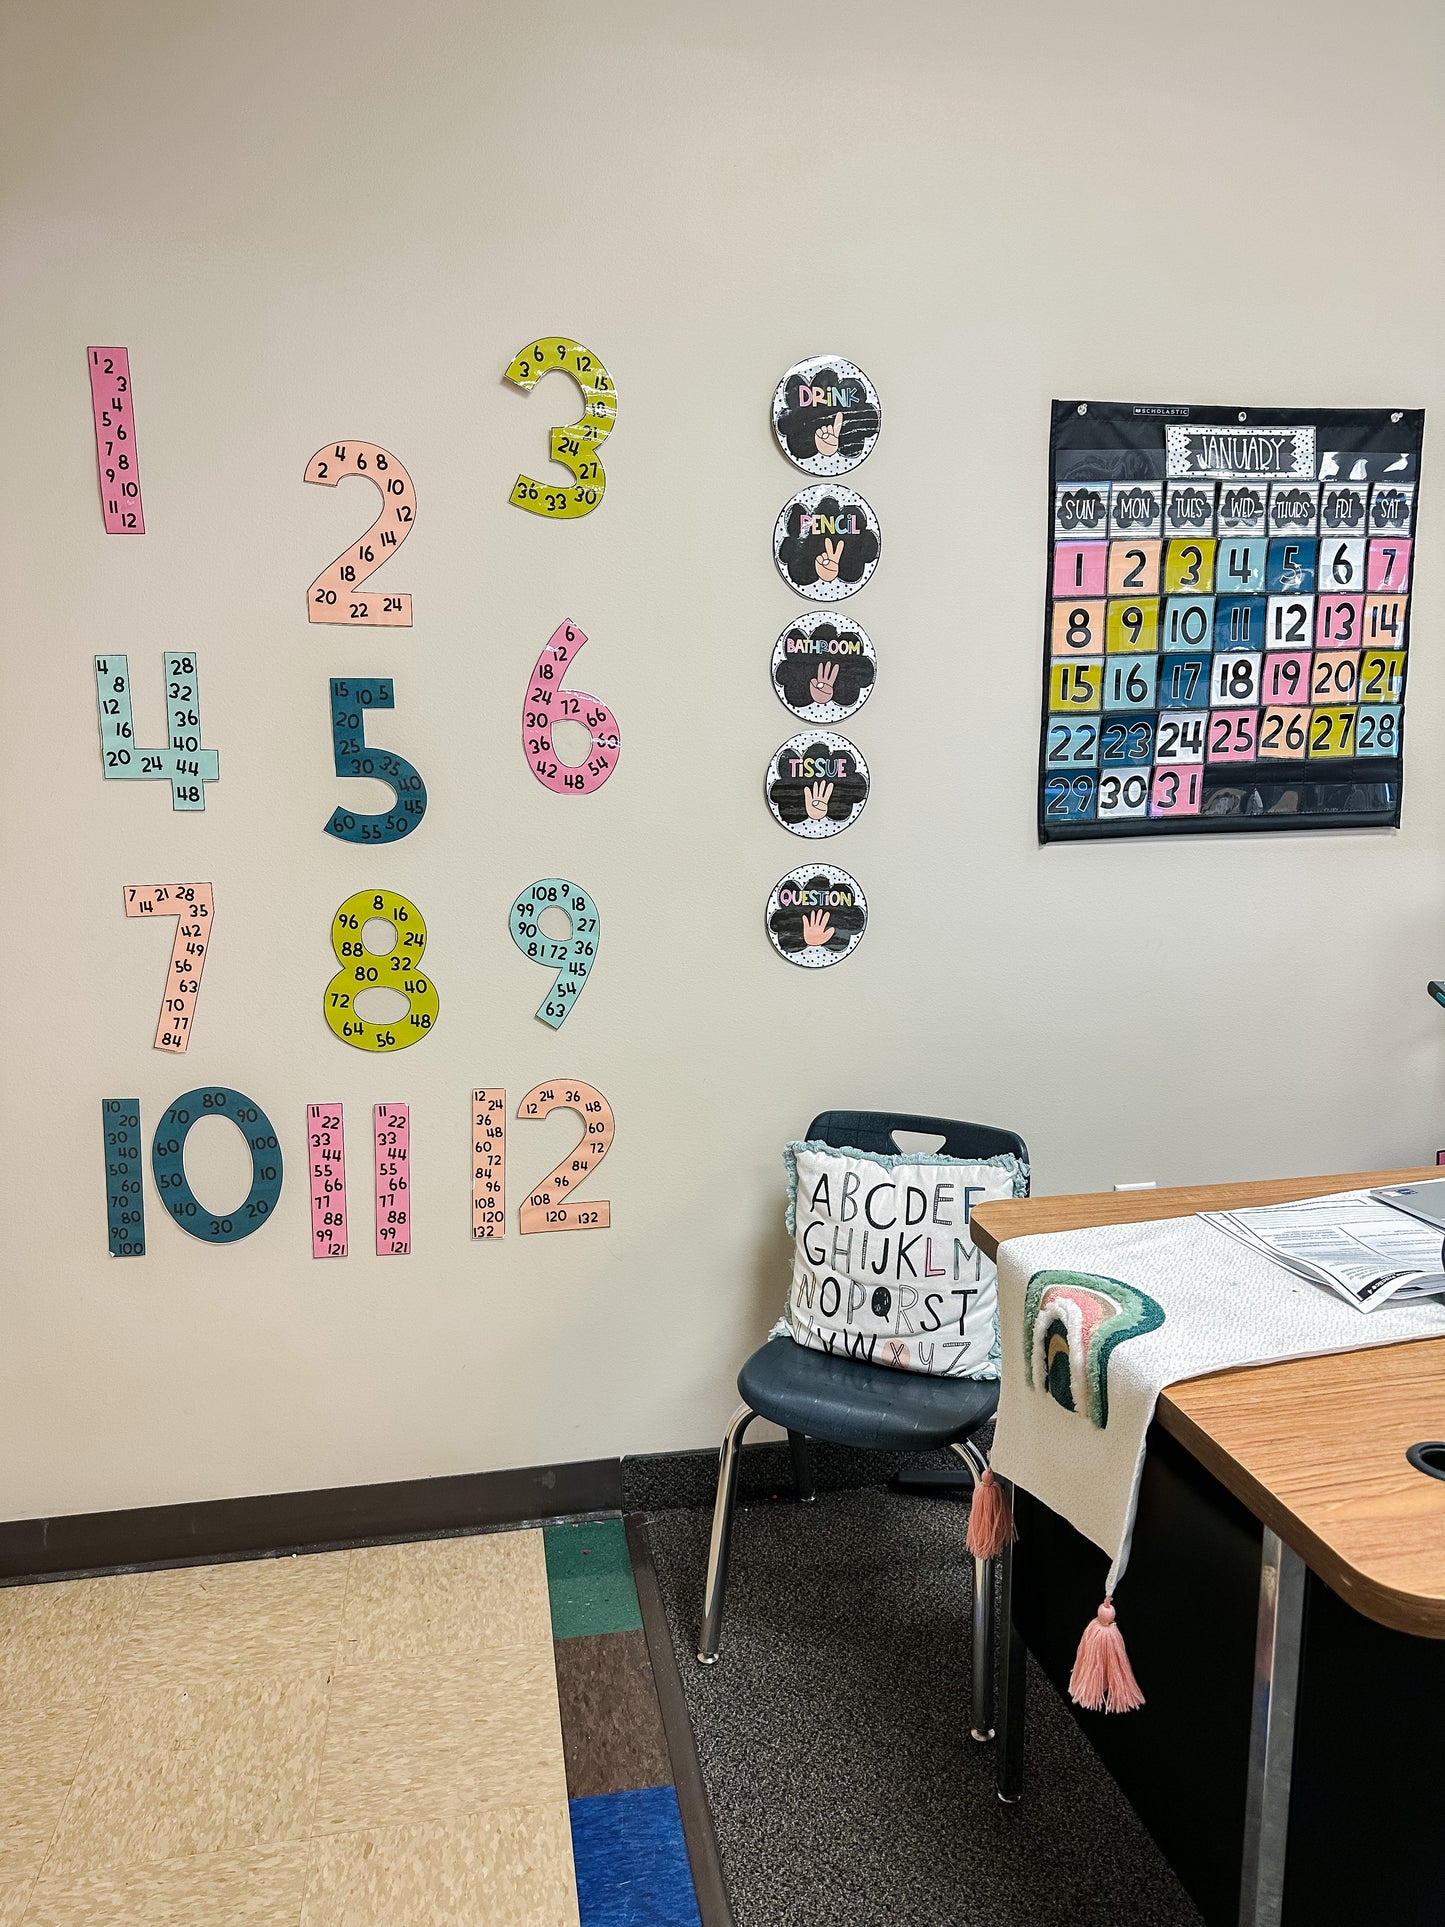 Multiples Posters for Multiplication Facts 1 - 12 | Classroom Decor